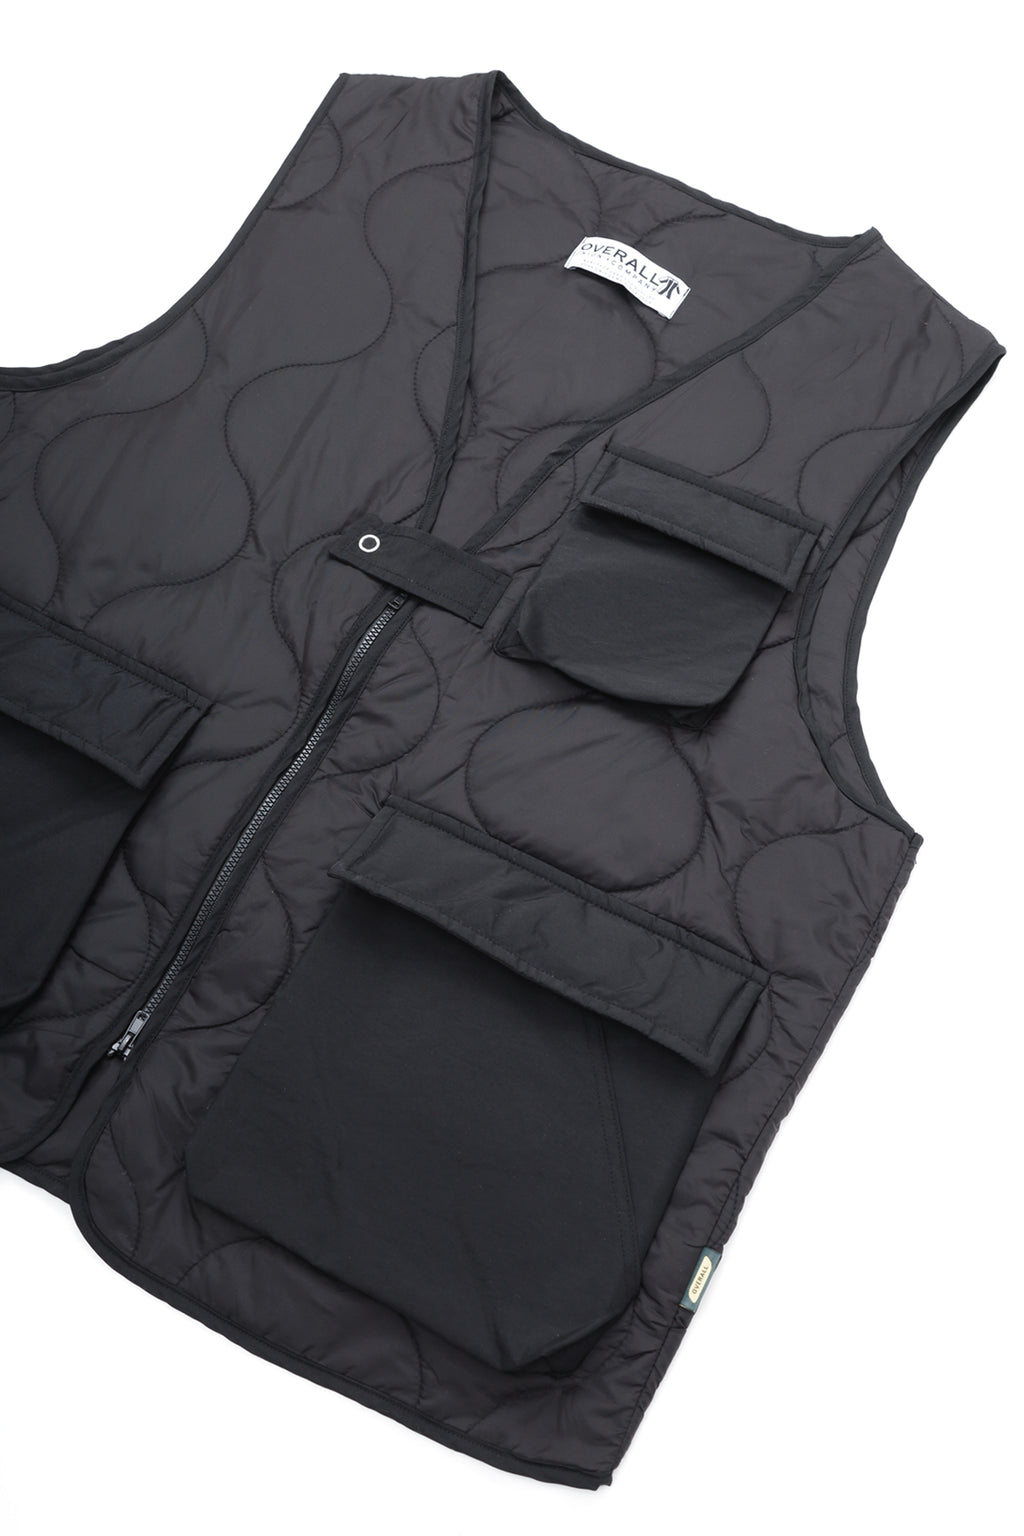 Overall Union - Quilted Light Liner Jacket - Black